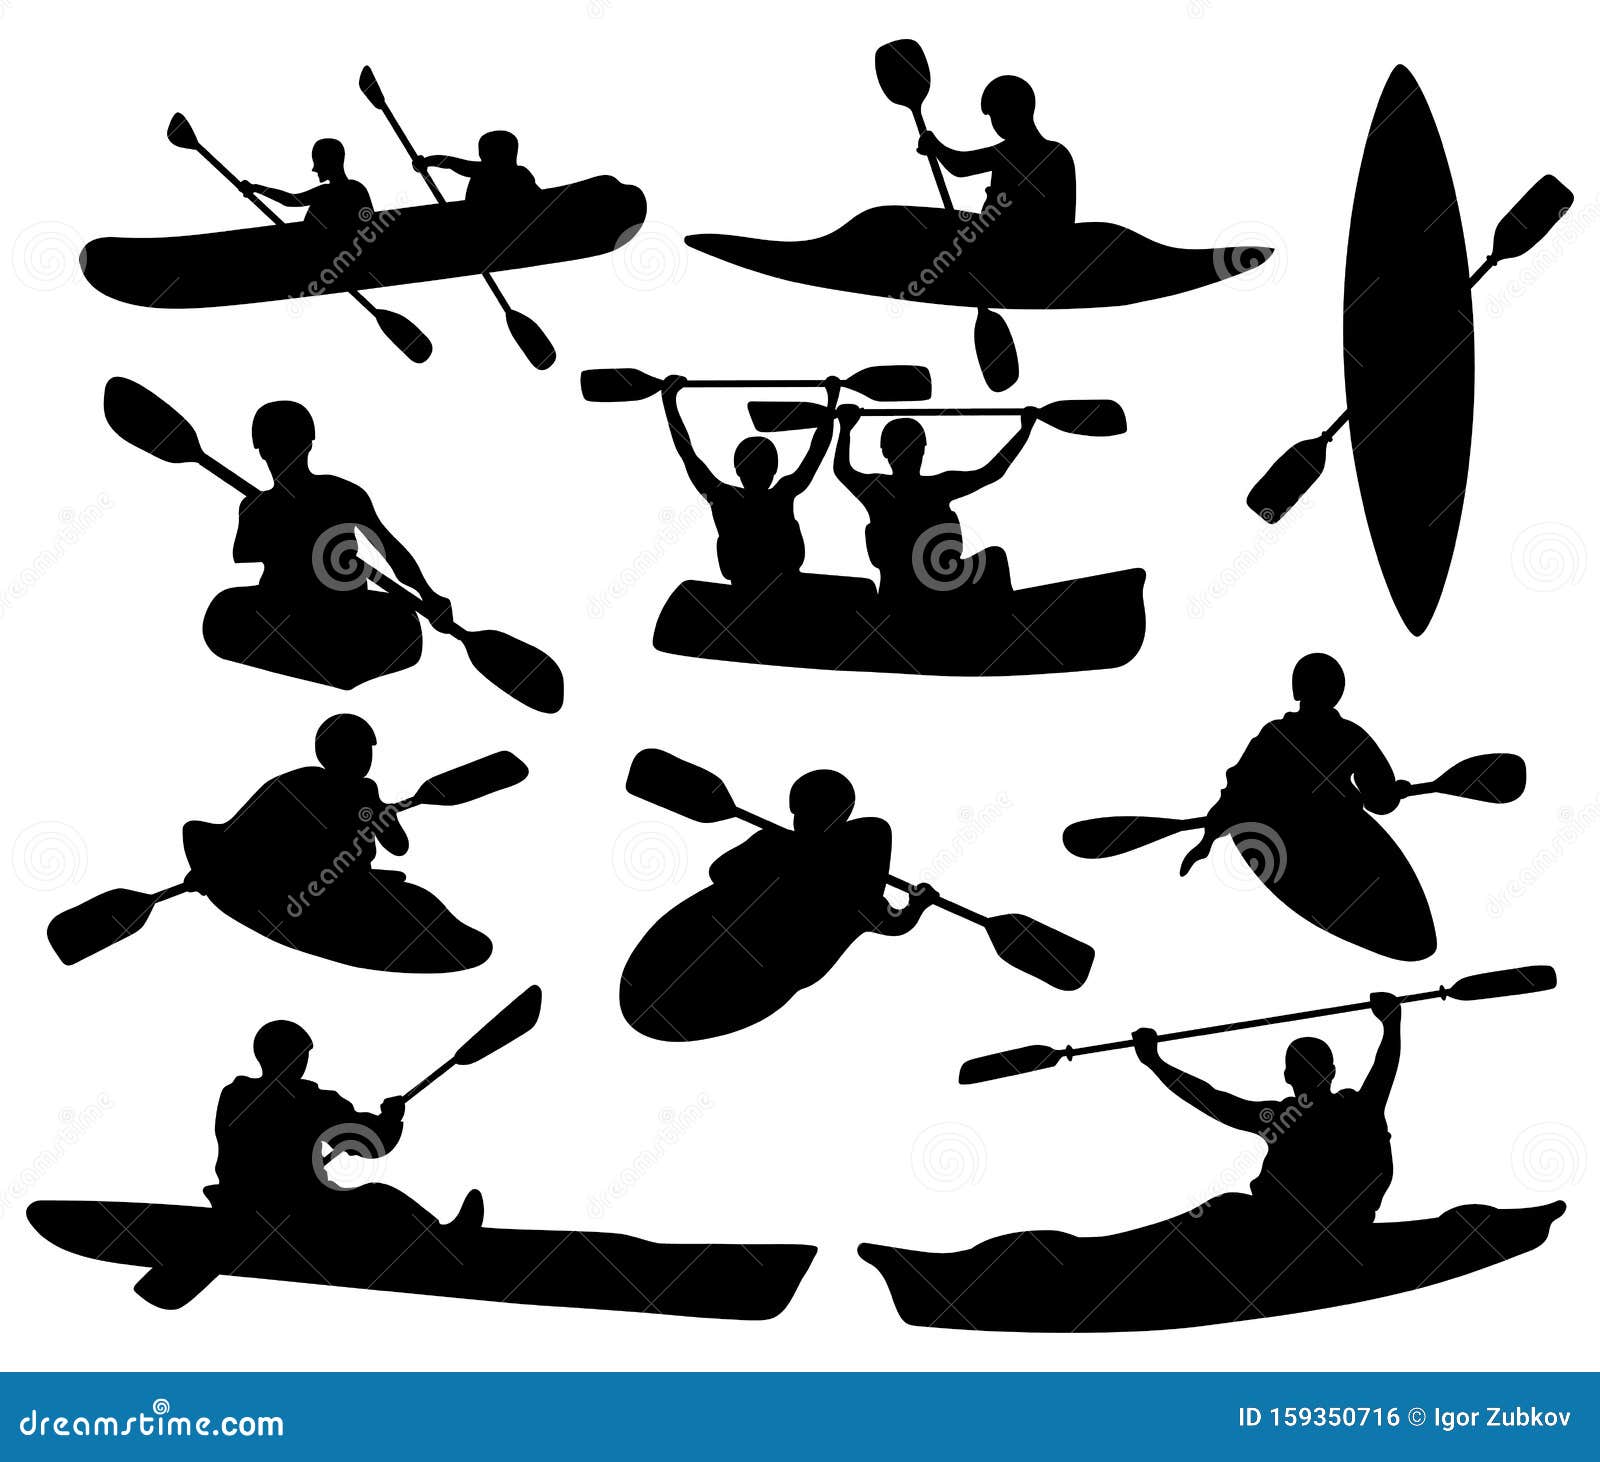 set of silhouettes of people swimming in a canoe. black white  of a kayak with men.  drawing of rowing